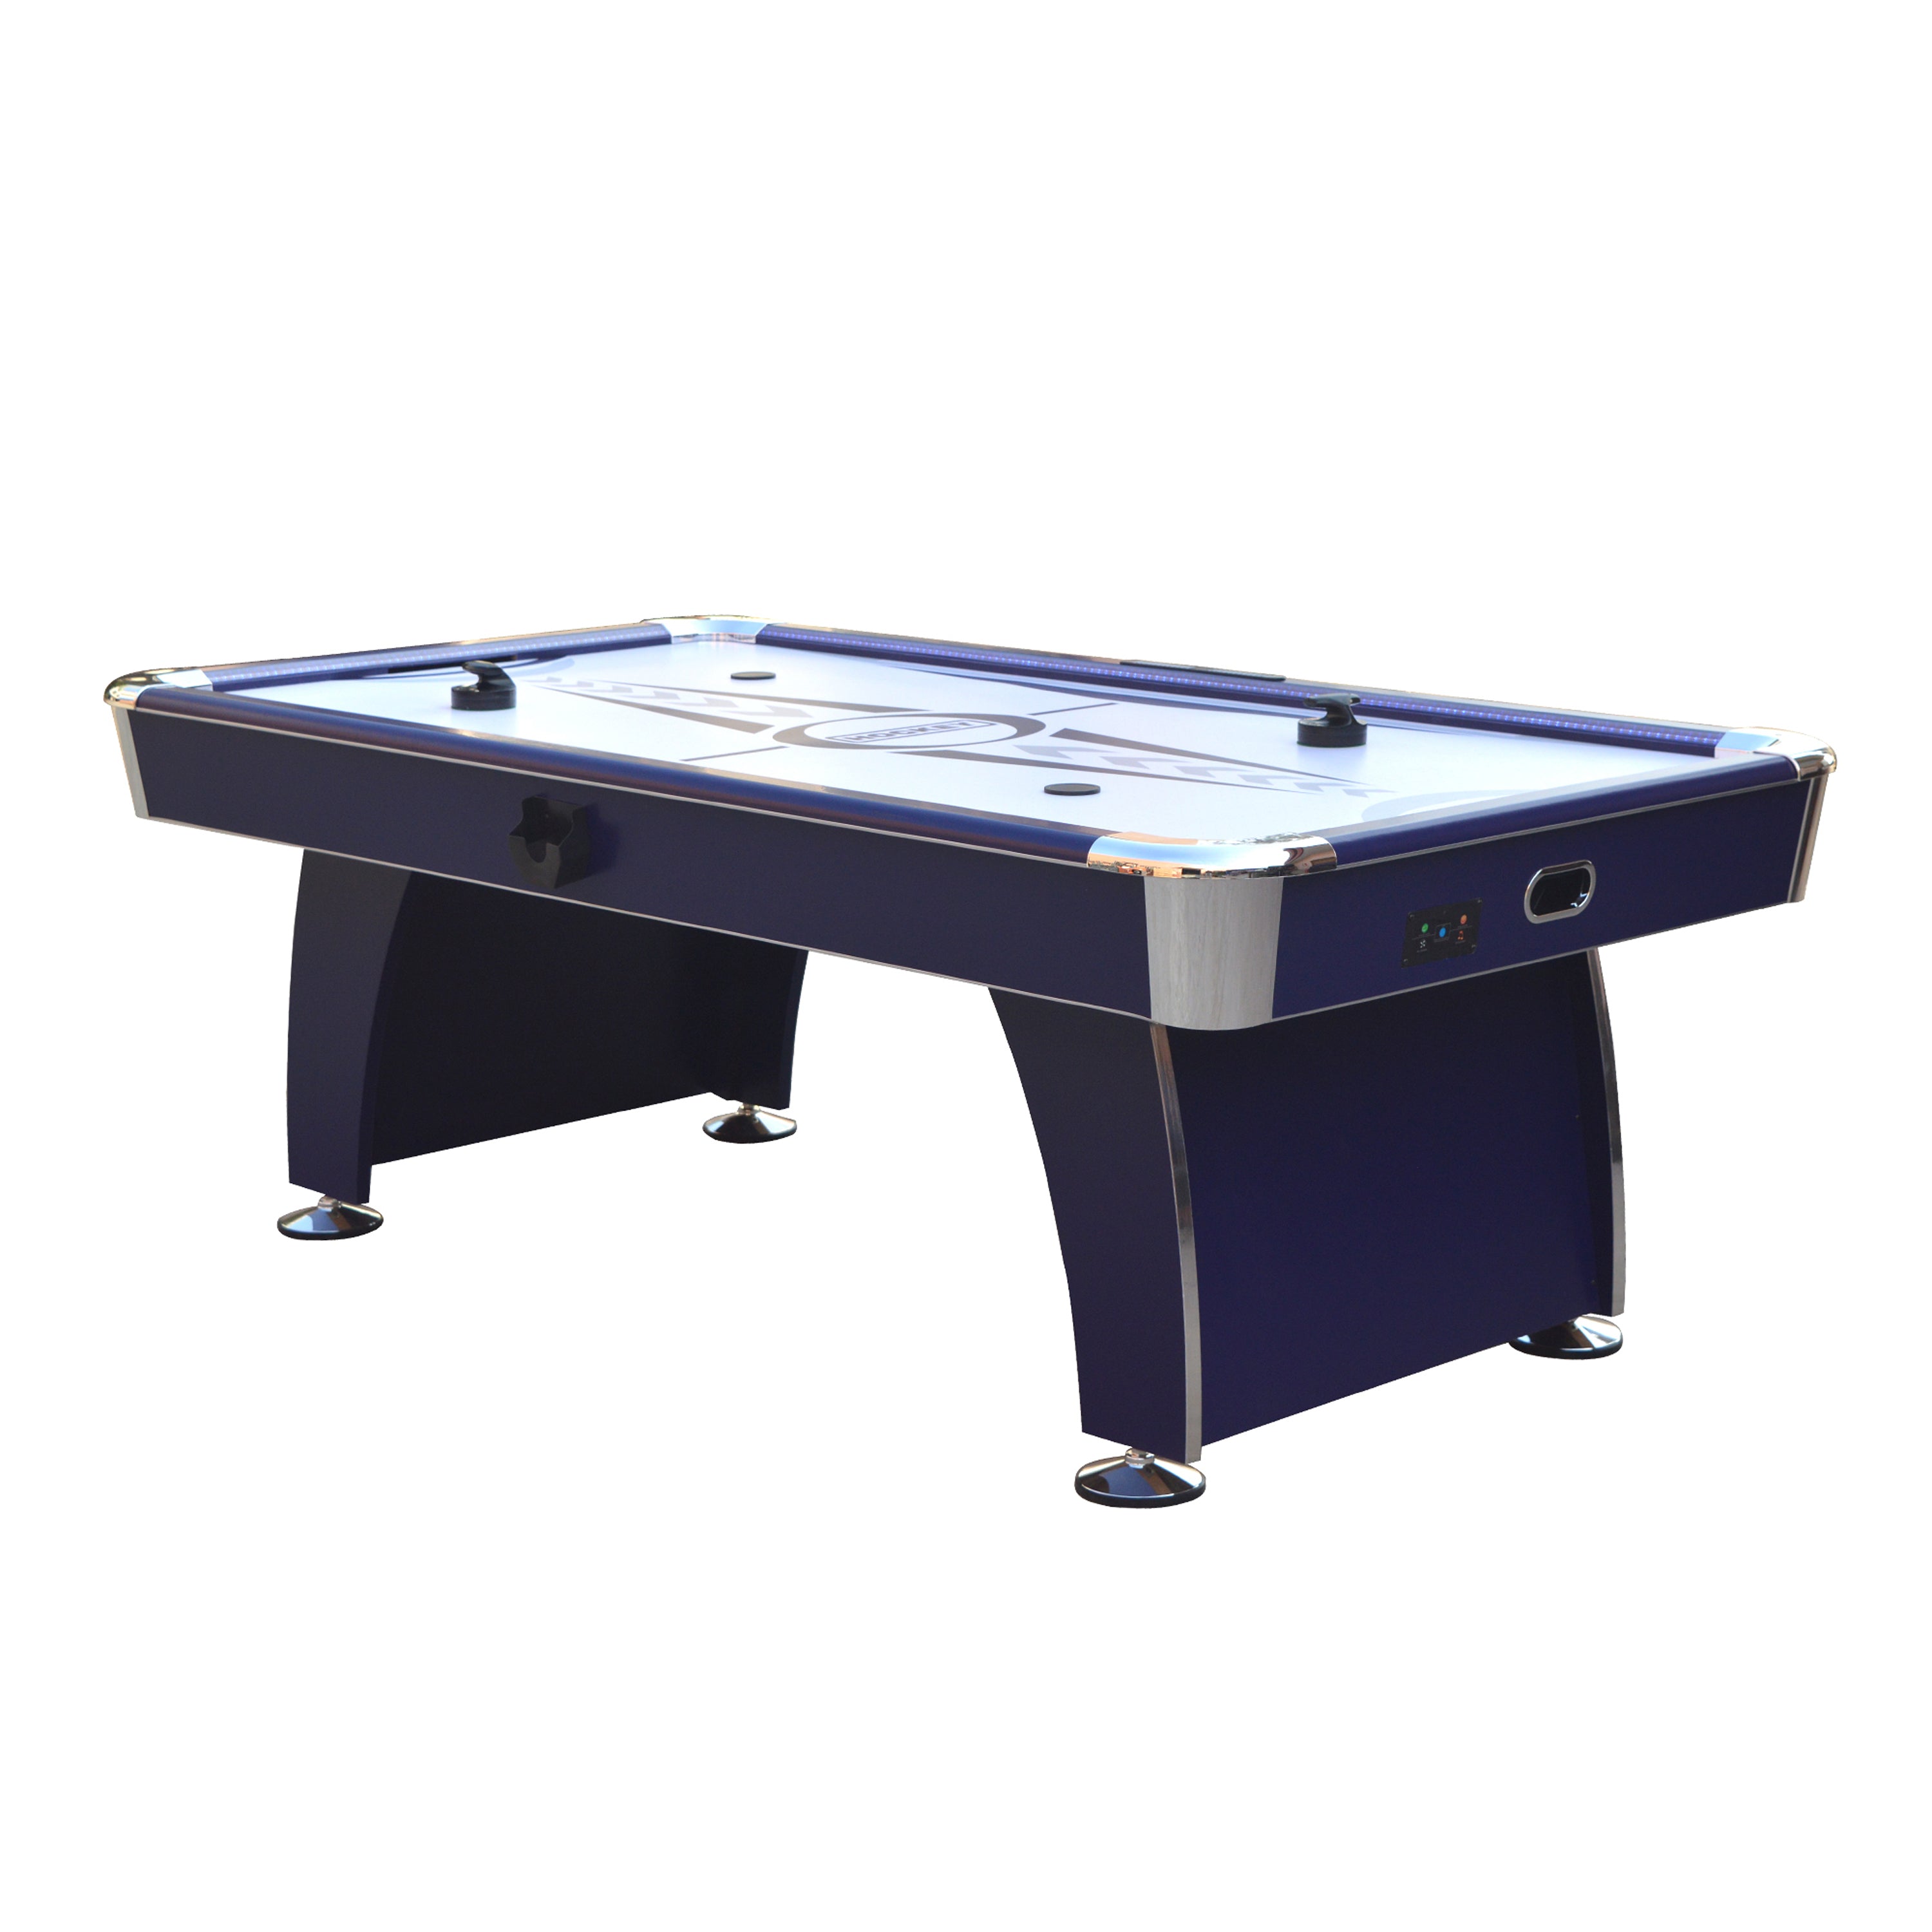 Phantom II 90-in Air Hockey Table with LED Scoring and Lights